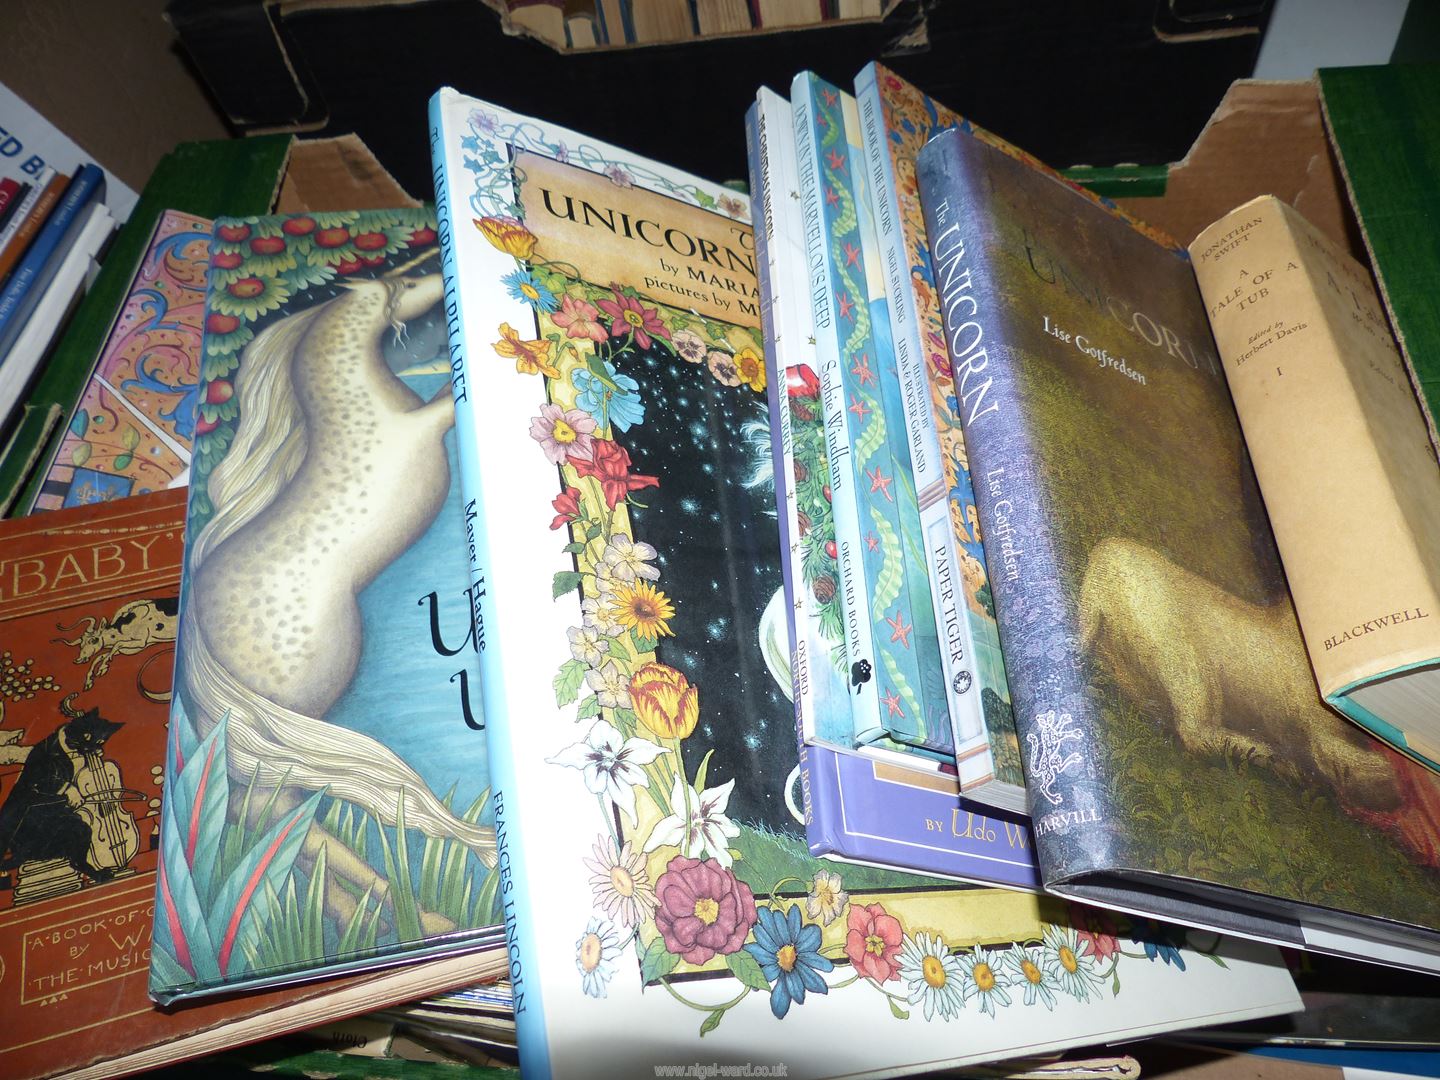 A quantity of books on Unicorns and Mythical Beasts etc. - Image 2 of 2